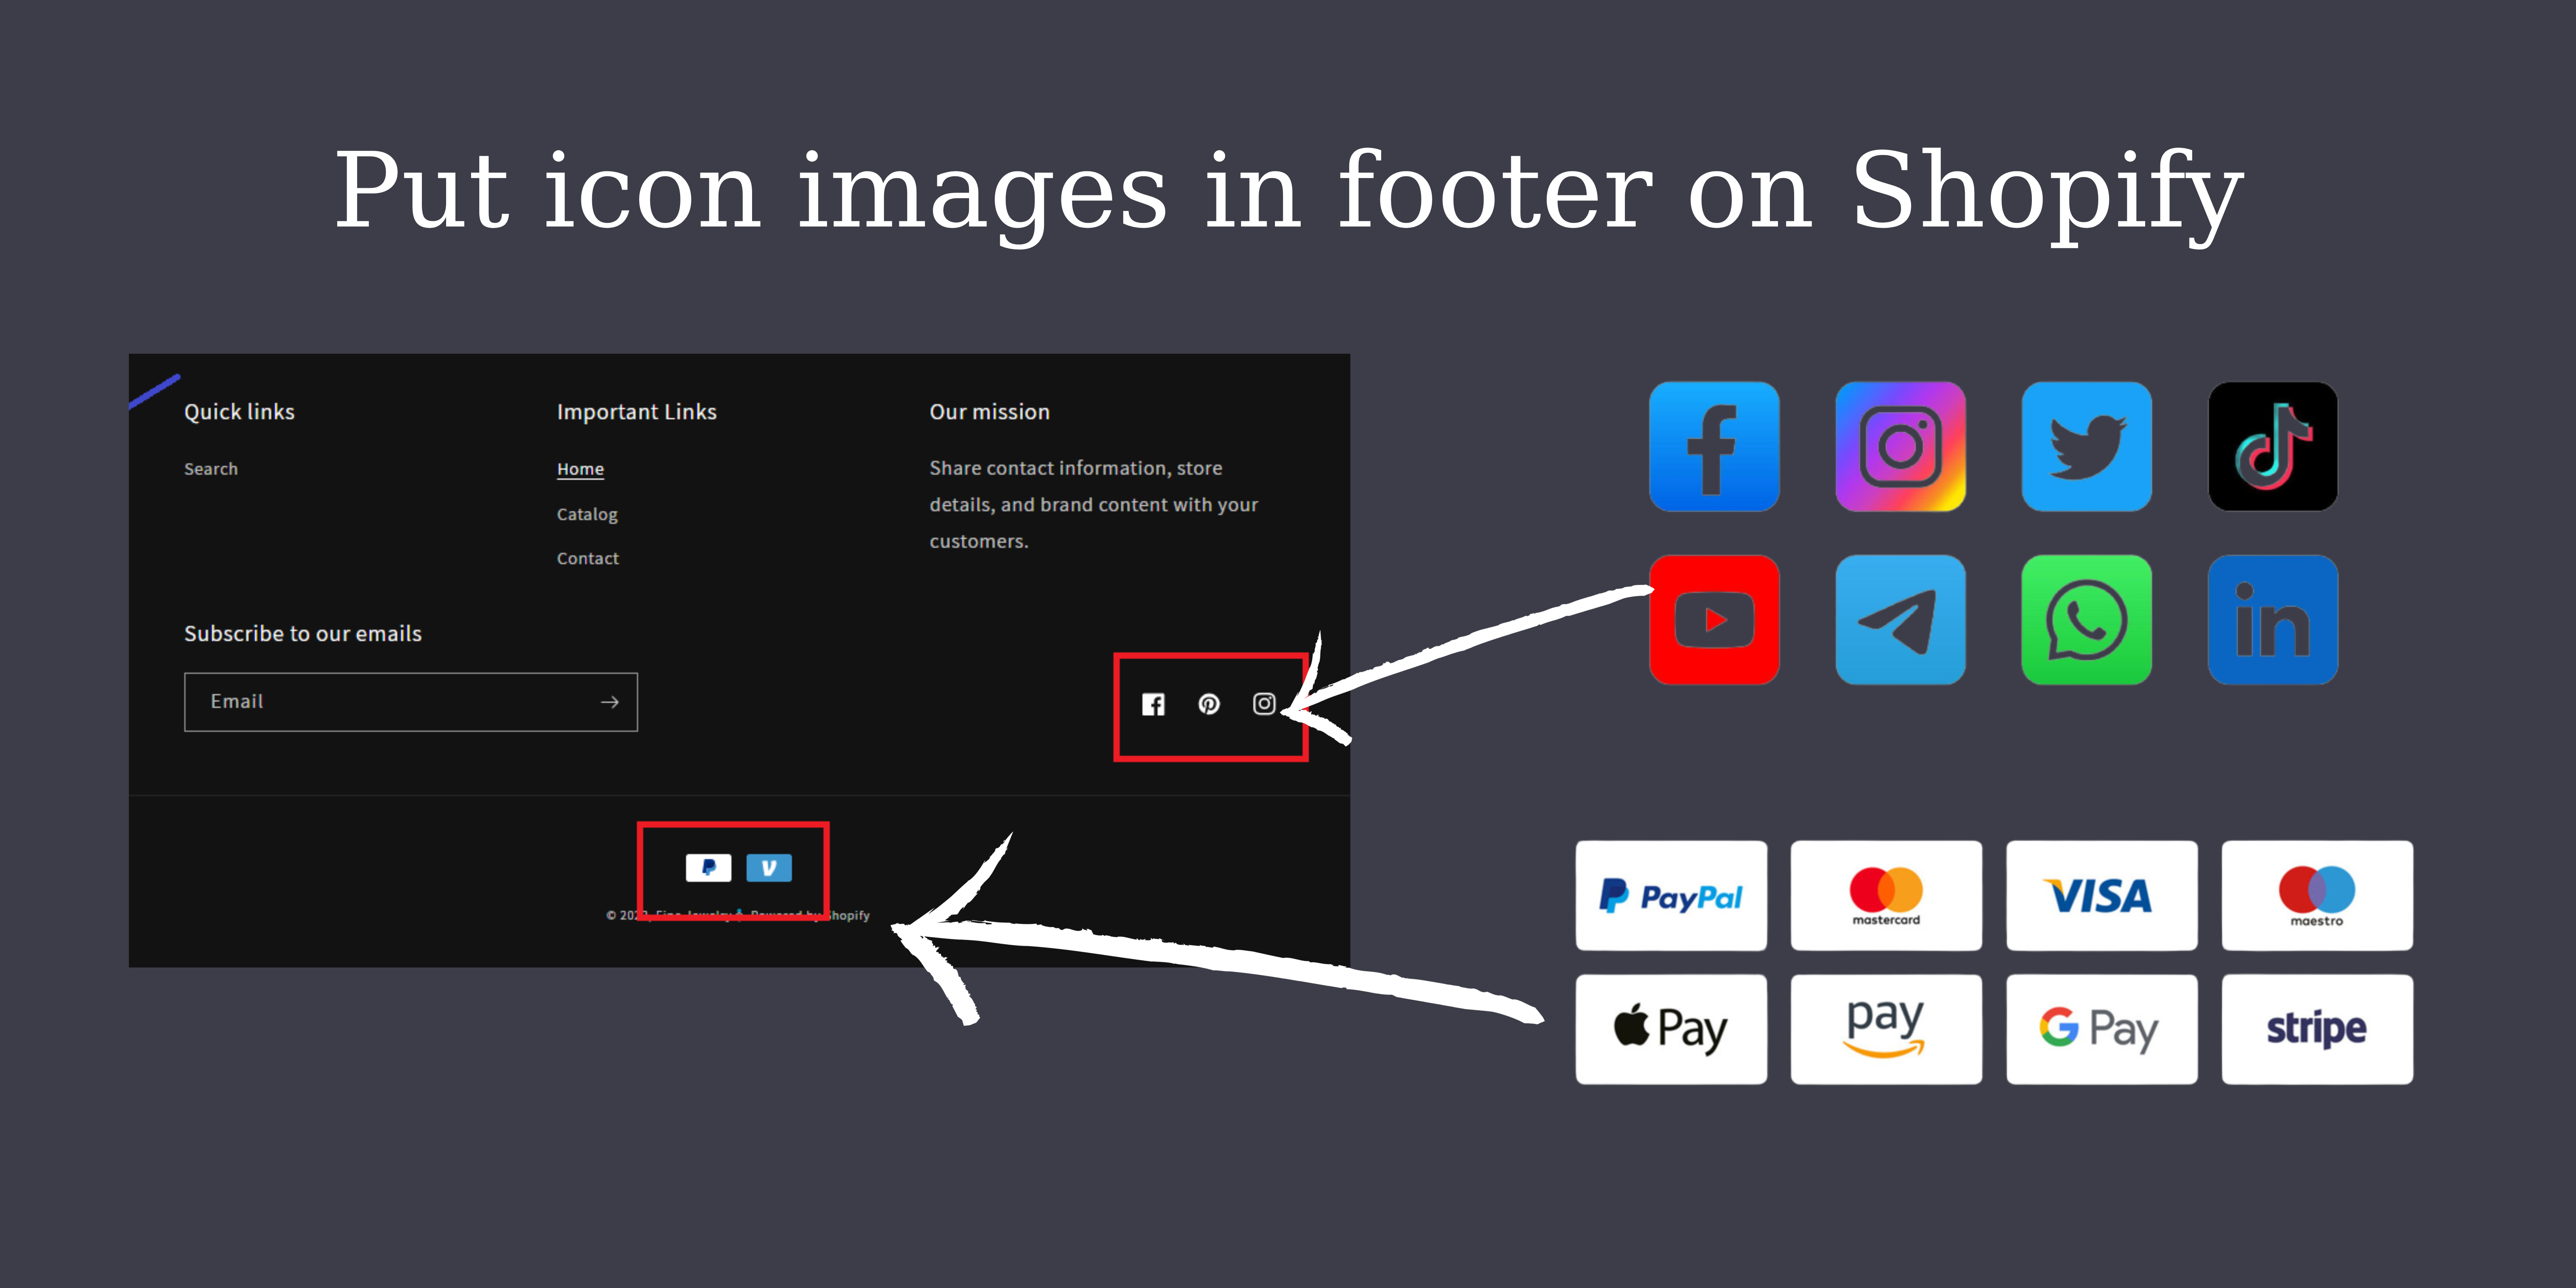 How to put icon images in footer shopify easily